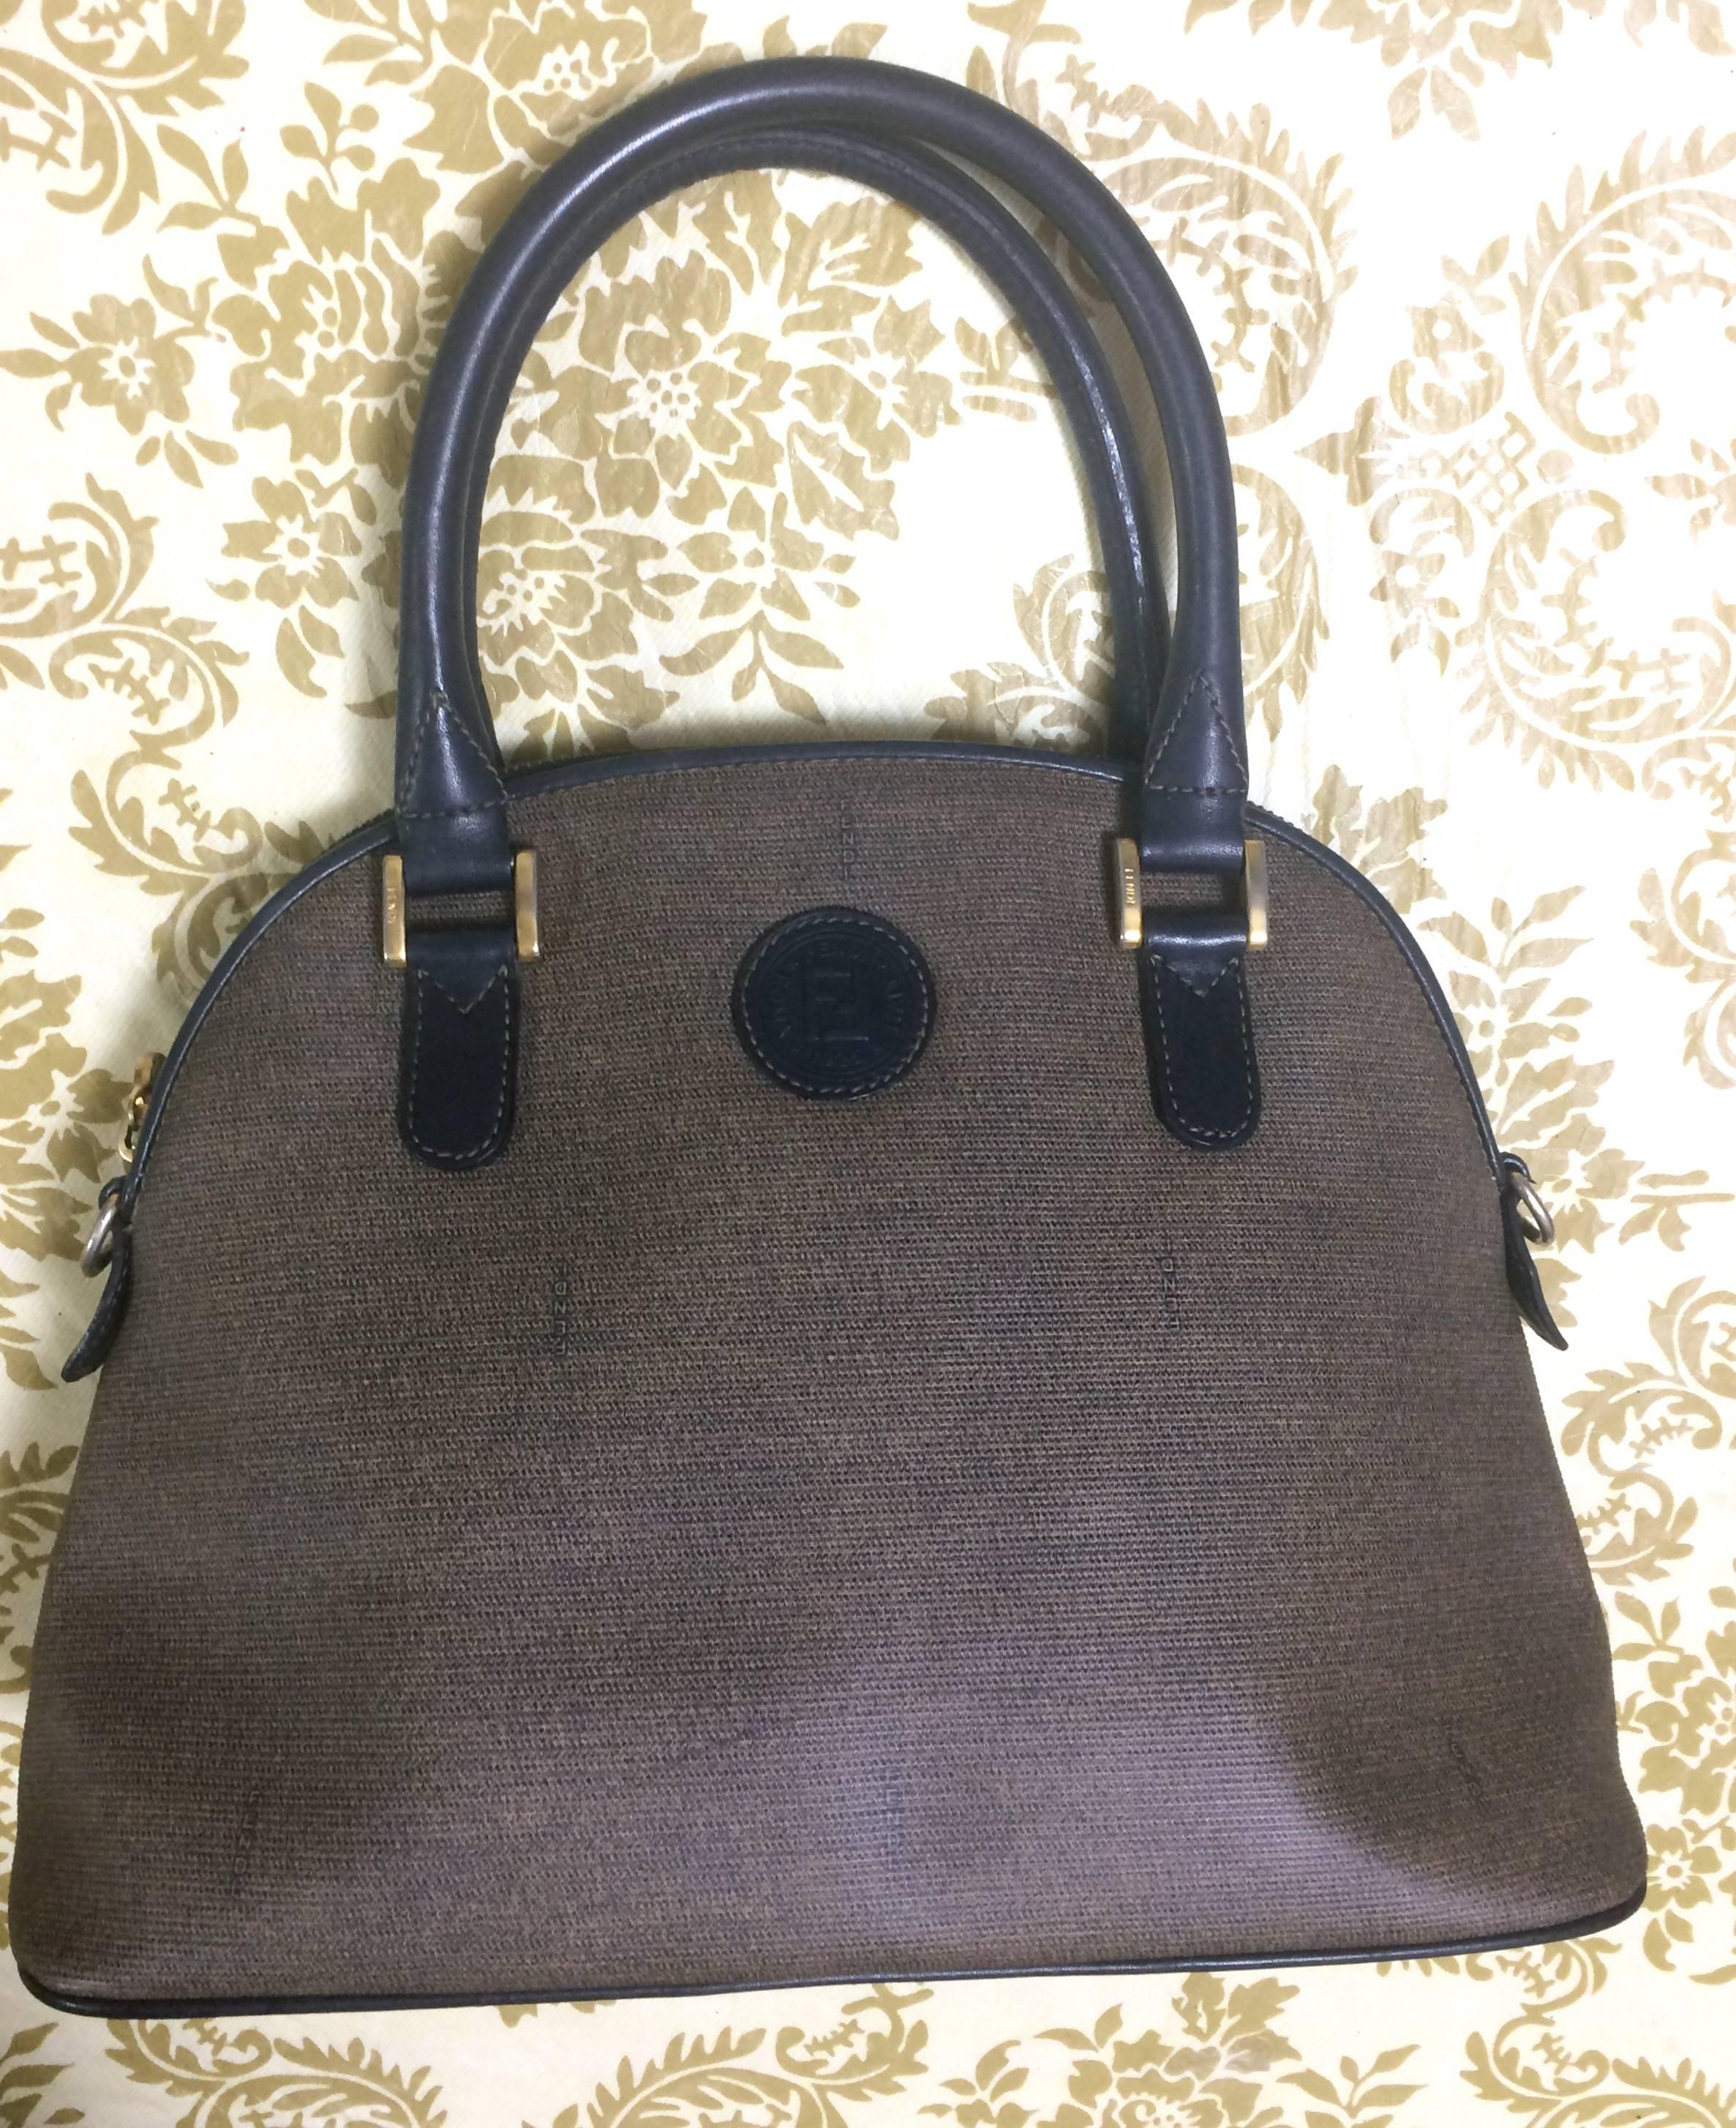 1990s. Vintage FENDI classic black and grey pecan vertical stripe bolide shape handbag with leather handles. Classic bag for daily use.

Here is another classic FENDI purse, iconic pecan pattern bag in bolide shape from the 90's. 
Very classic and